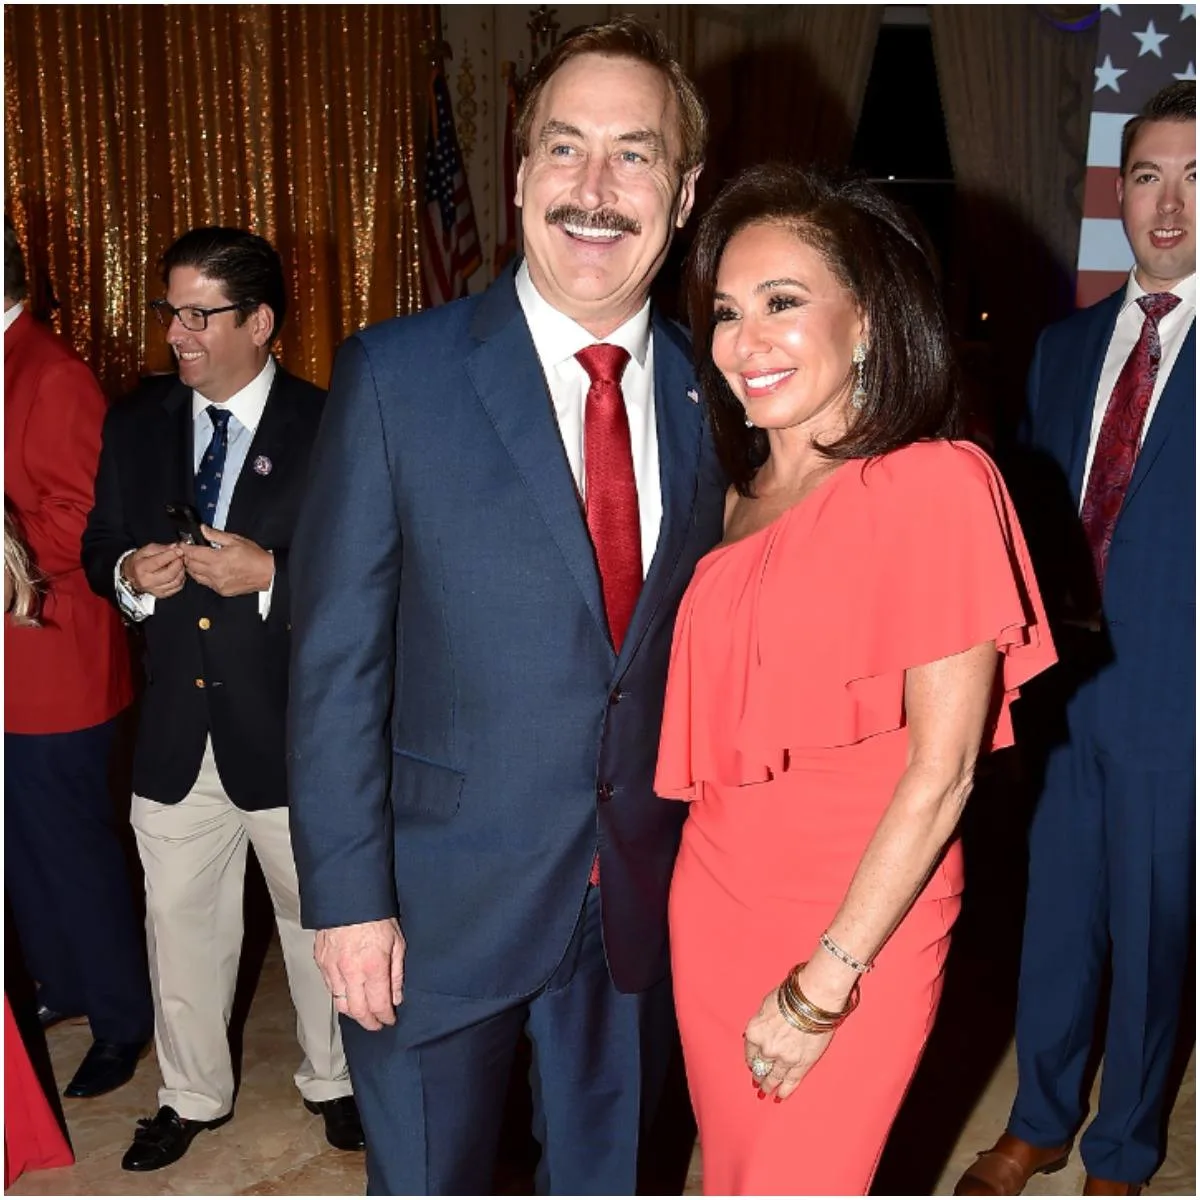 who is mike lindell married to now